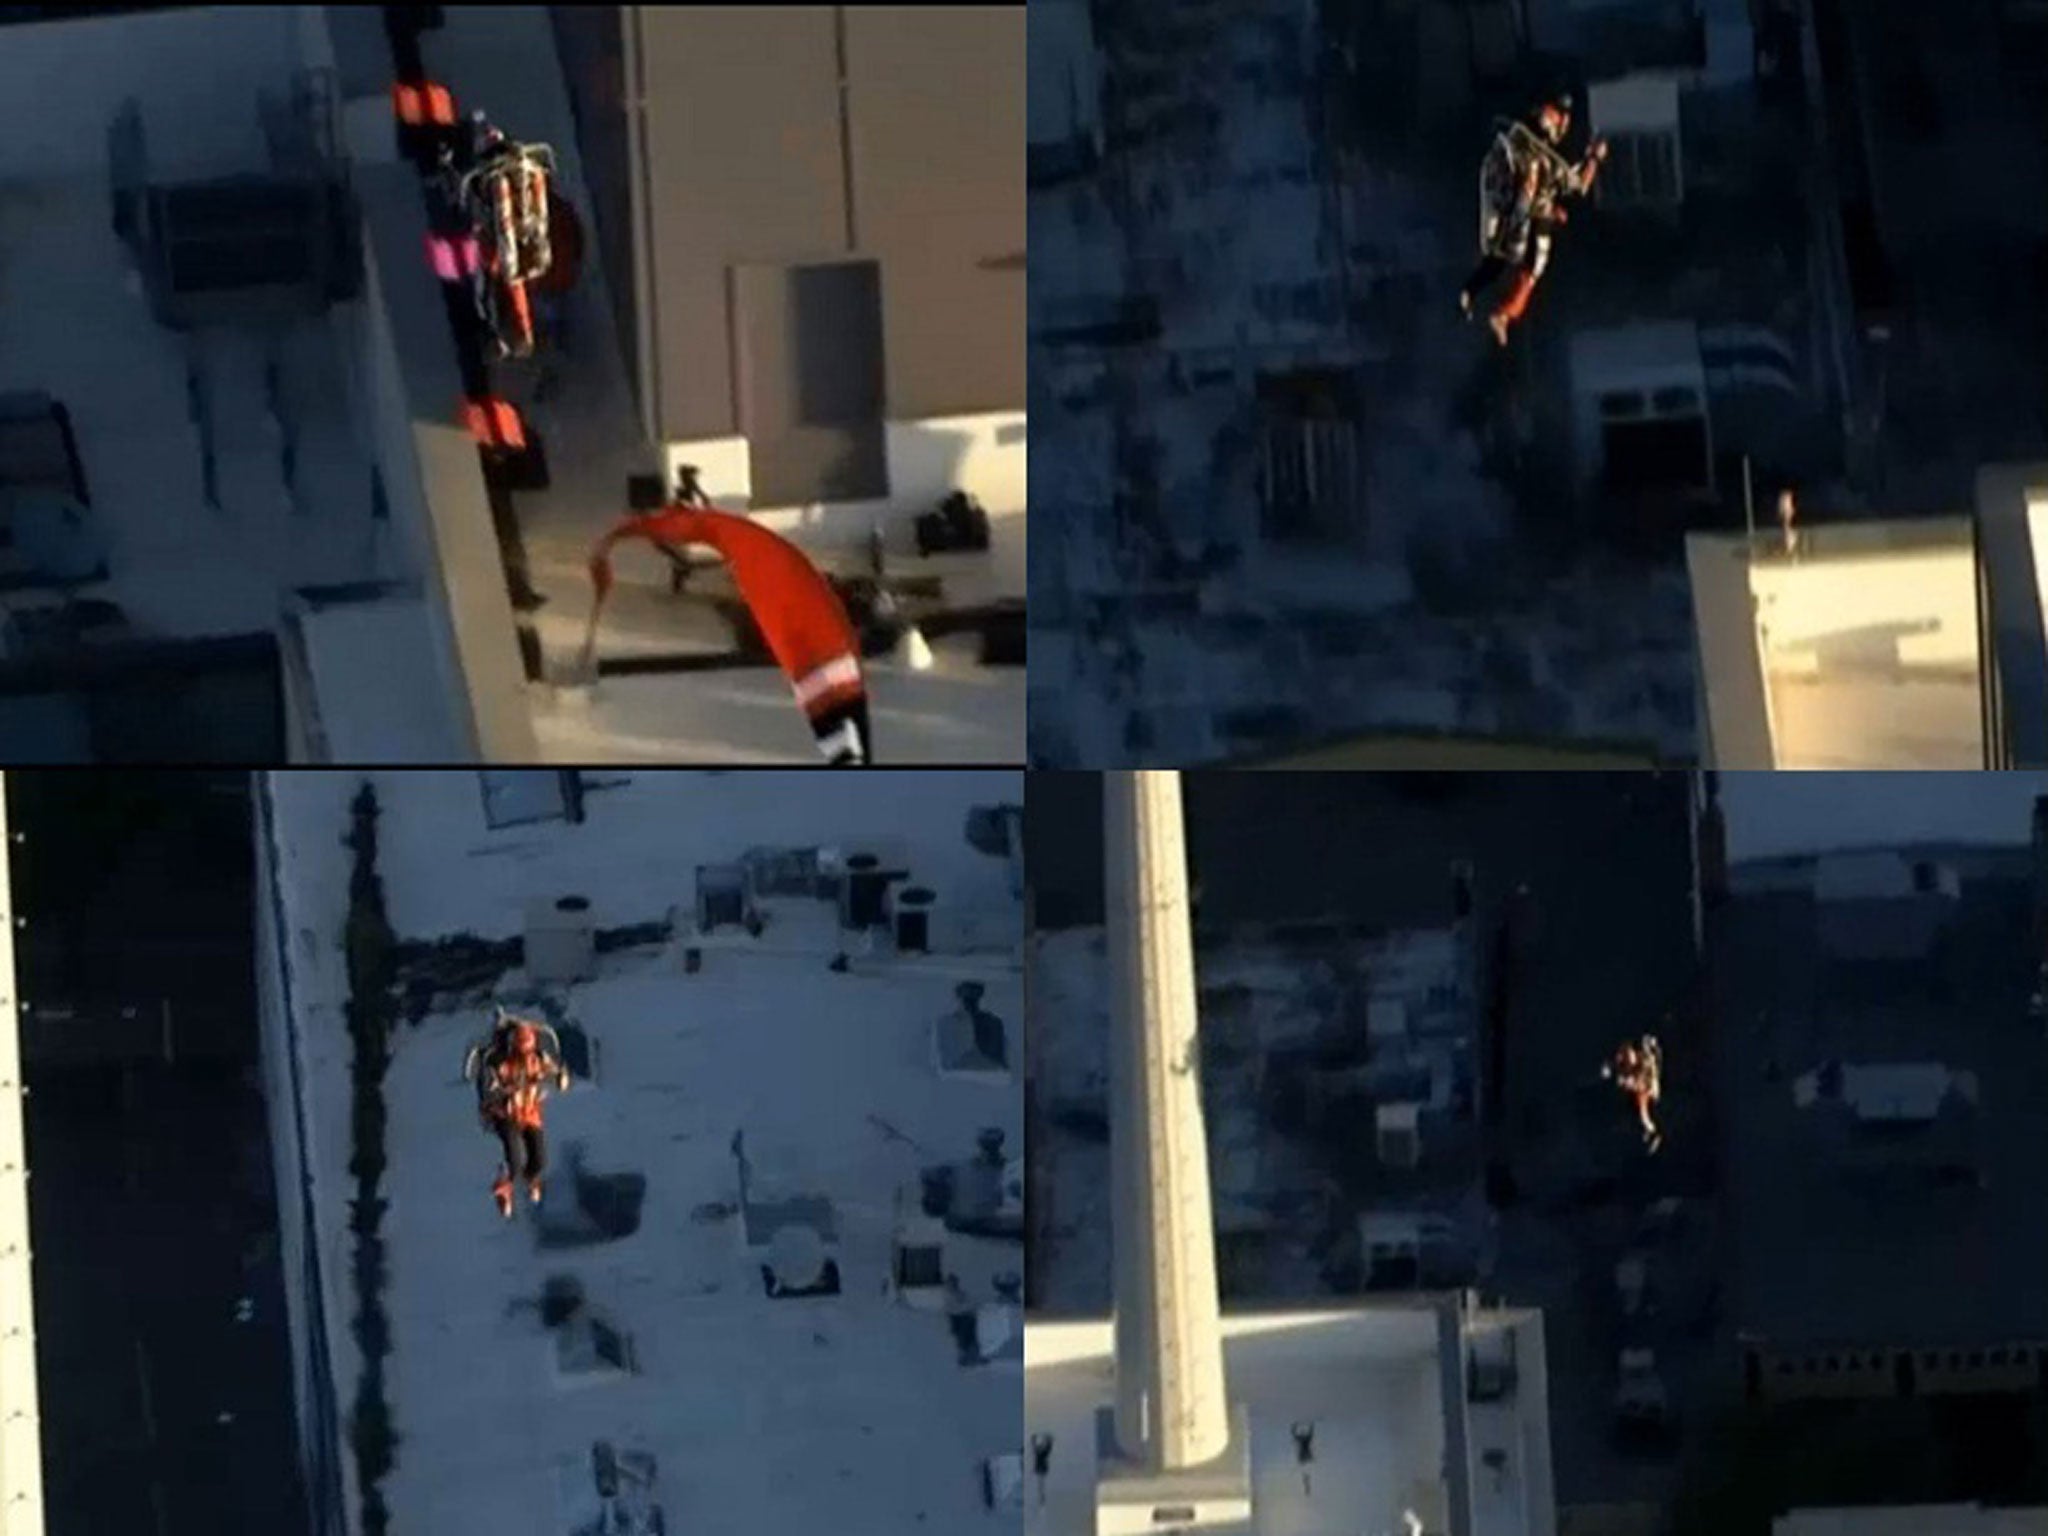 Daredevil Nick Macomber flies in a jet pack for 30 seconds after jumping off a hotel’s rooftop.